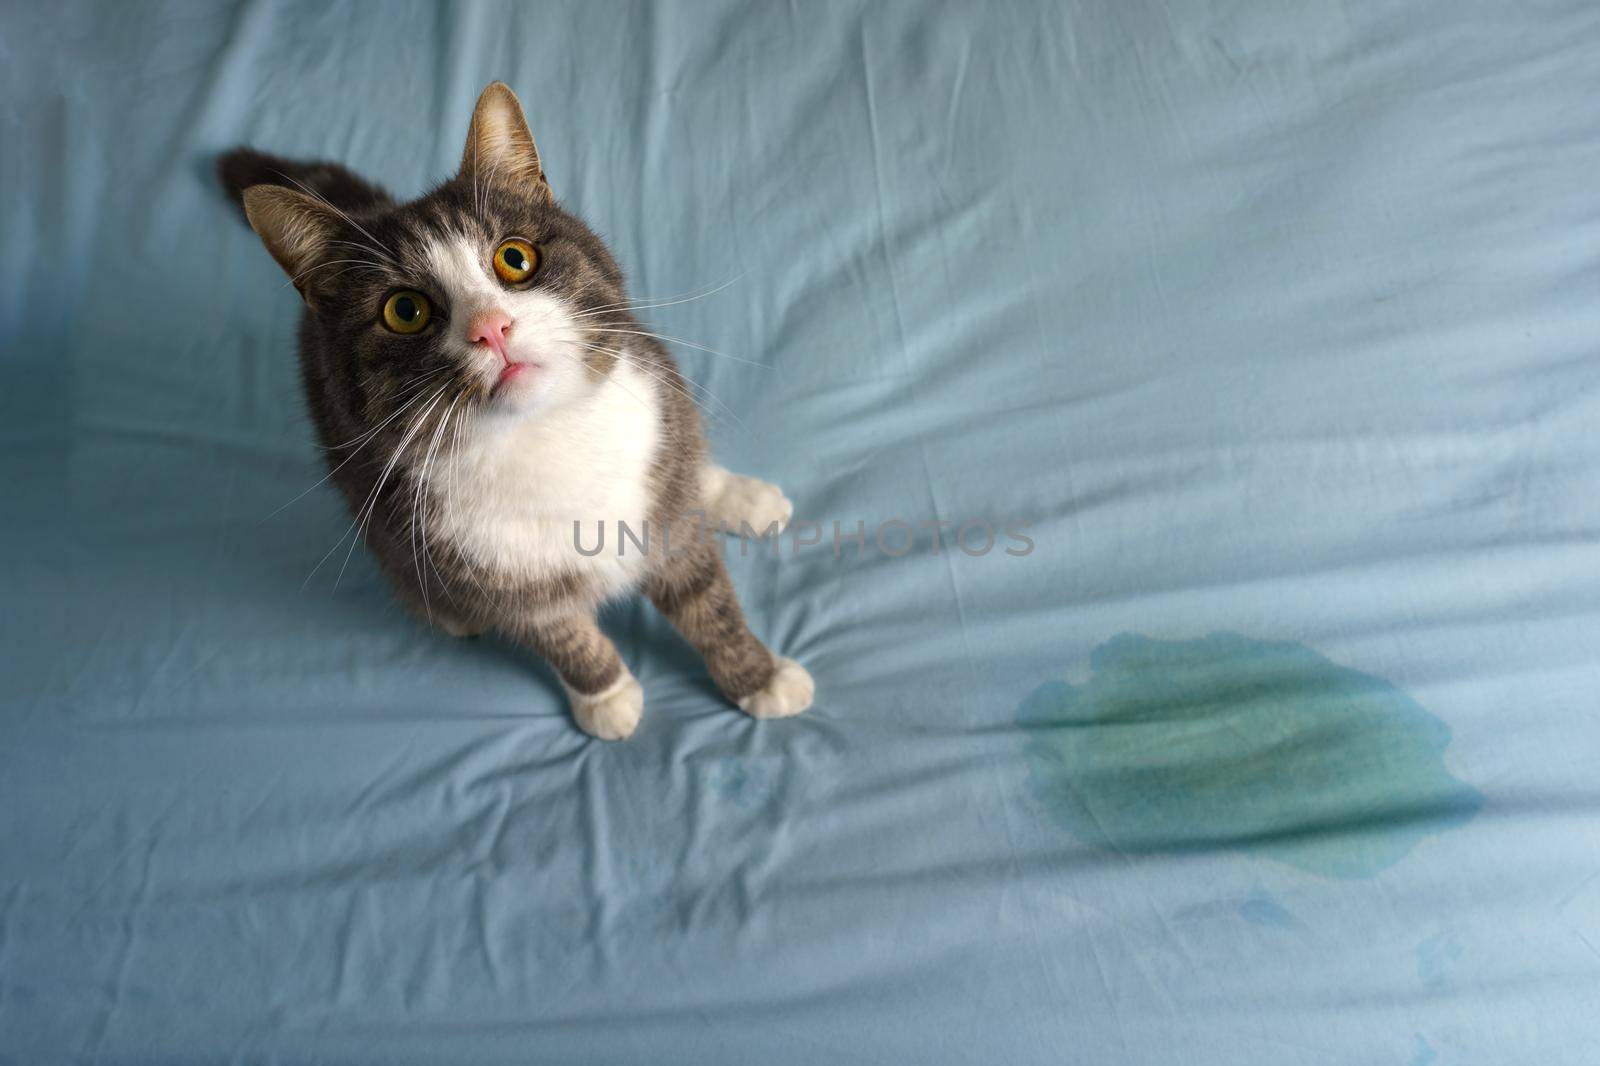 Cat sitting near wet or piss spot on the bed. Cat peeing or urinating on bed at home. Bad cat behaviour. High quality photo